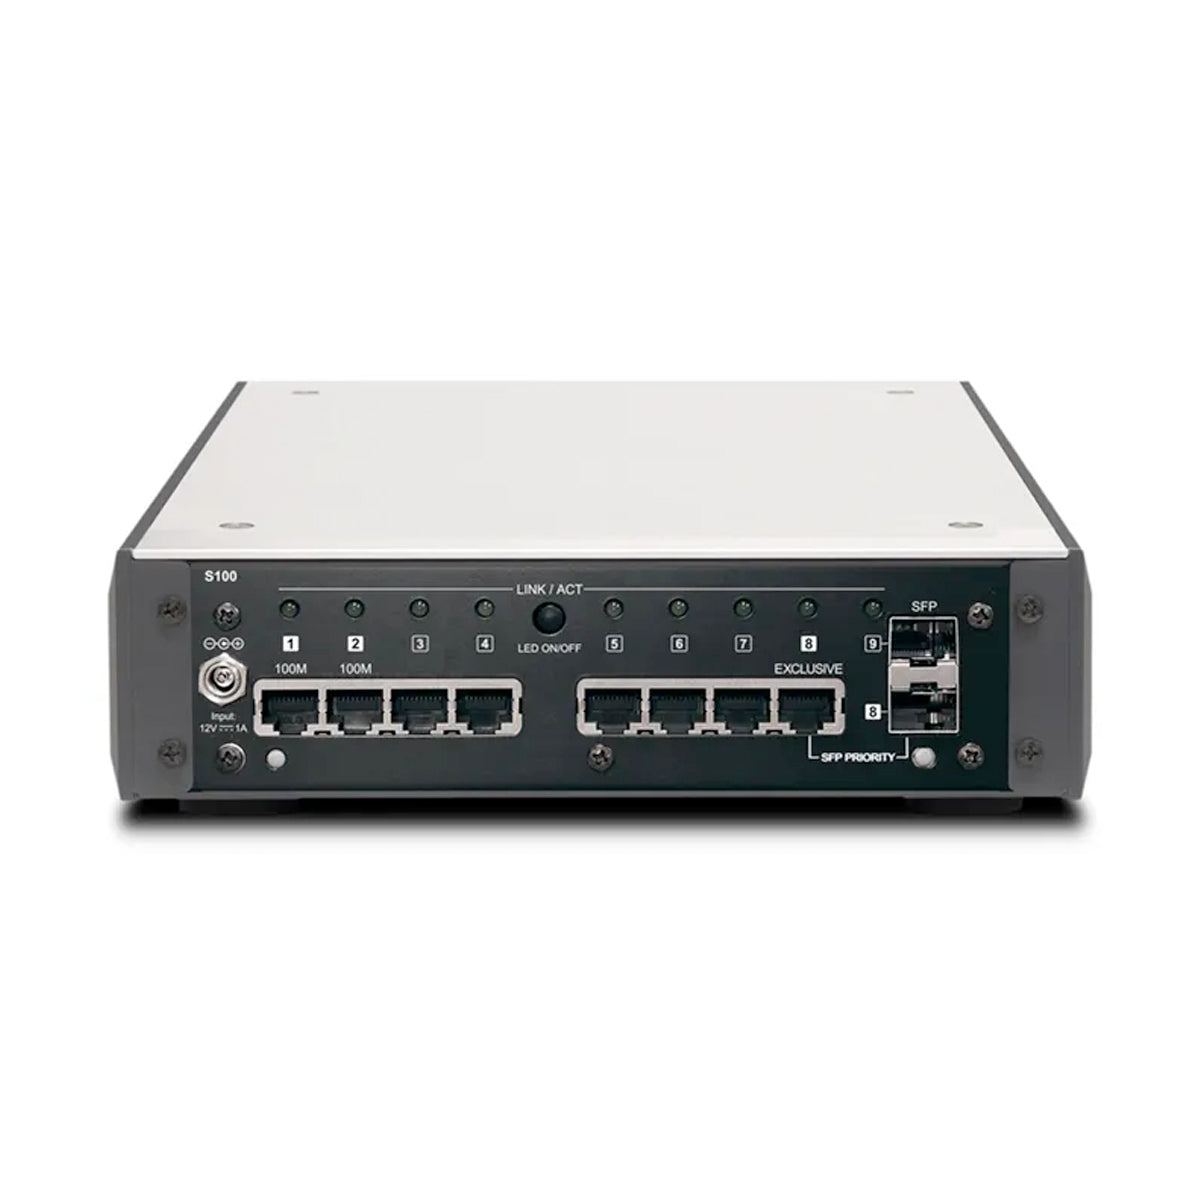 Melco S100/2-C Data Switch - Silver